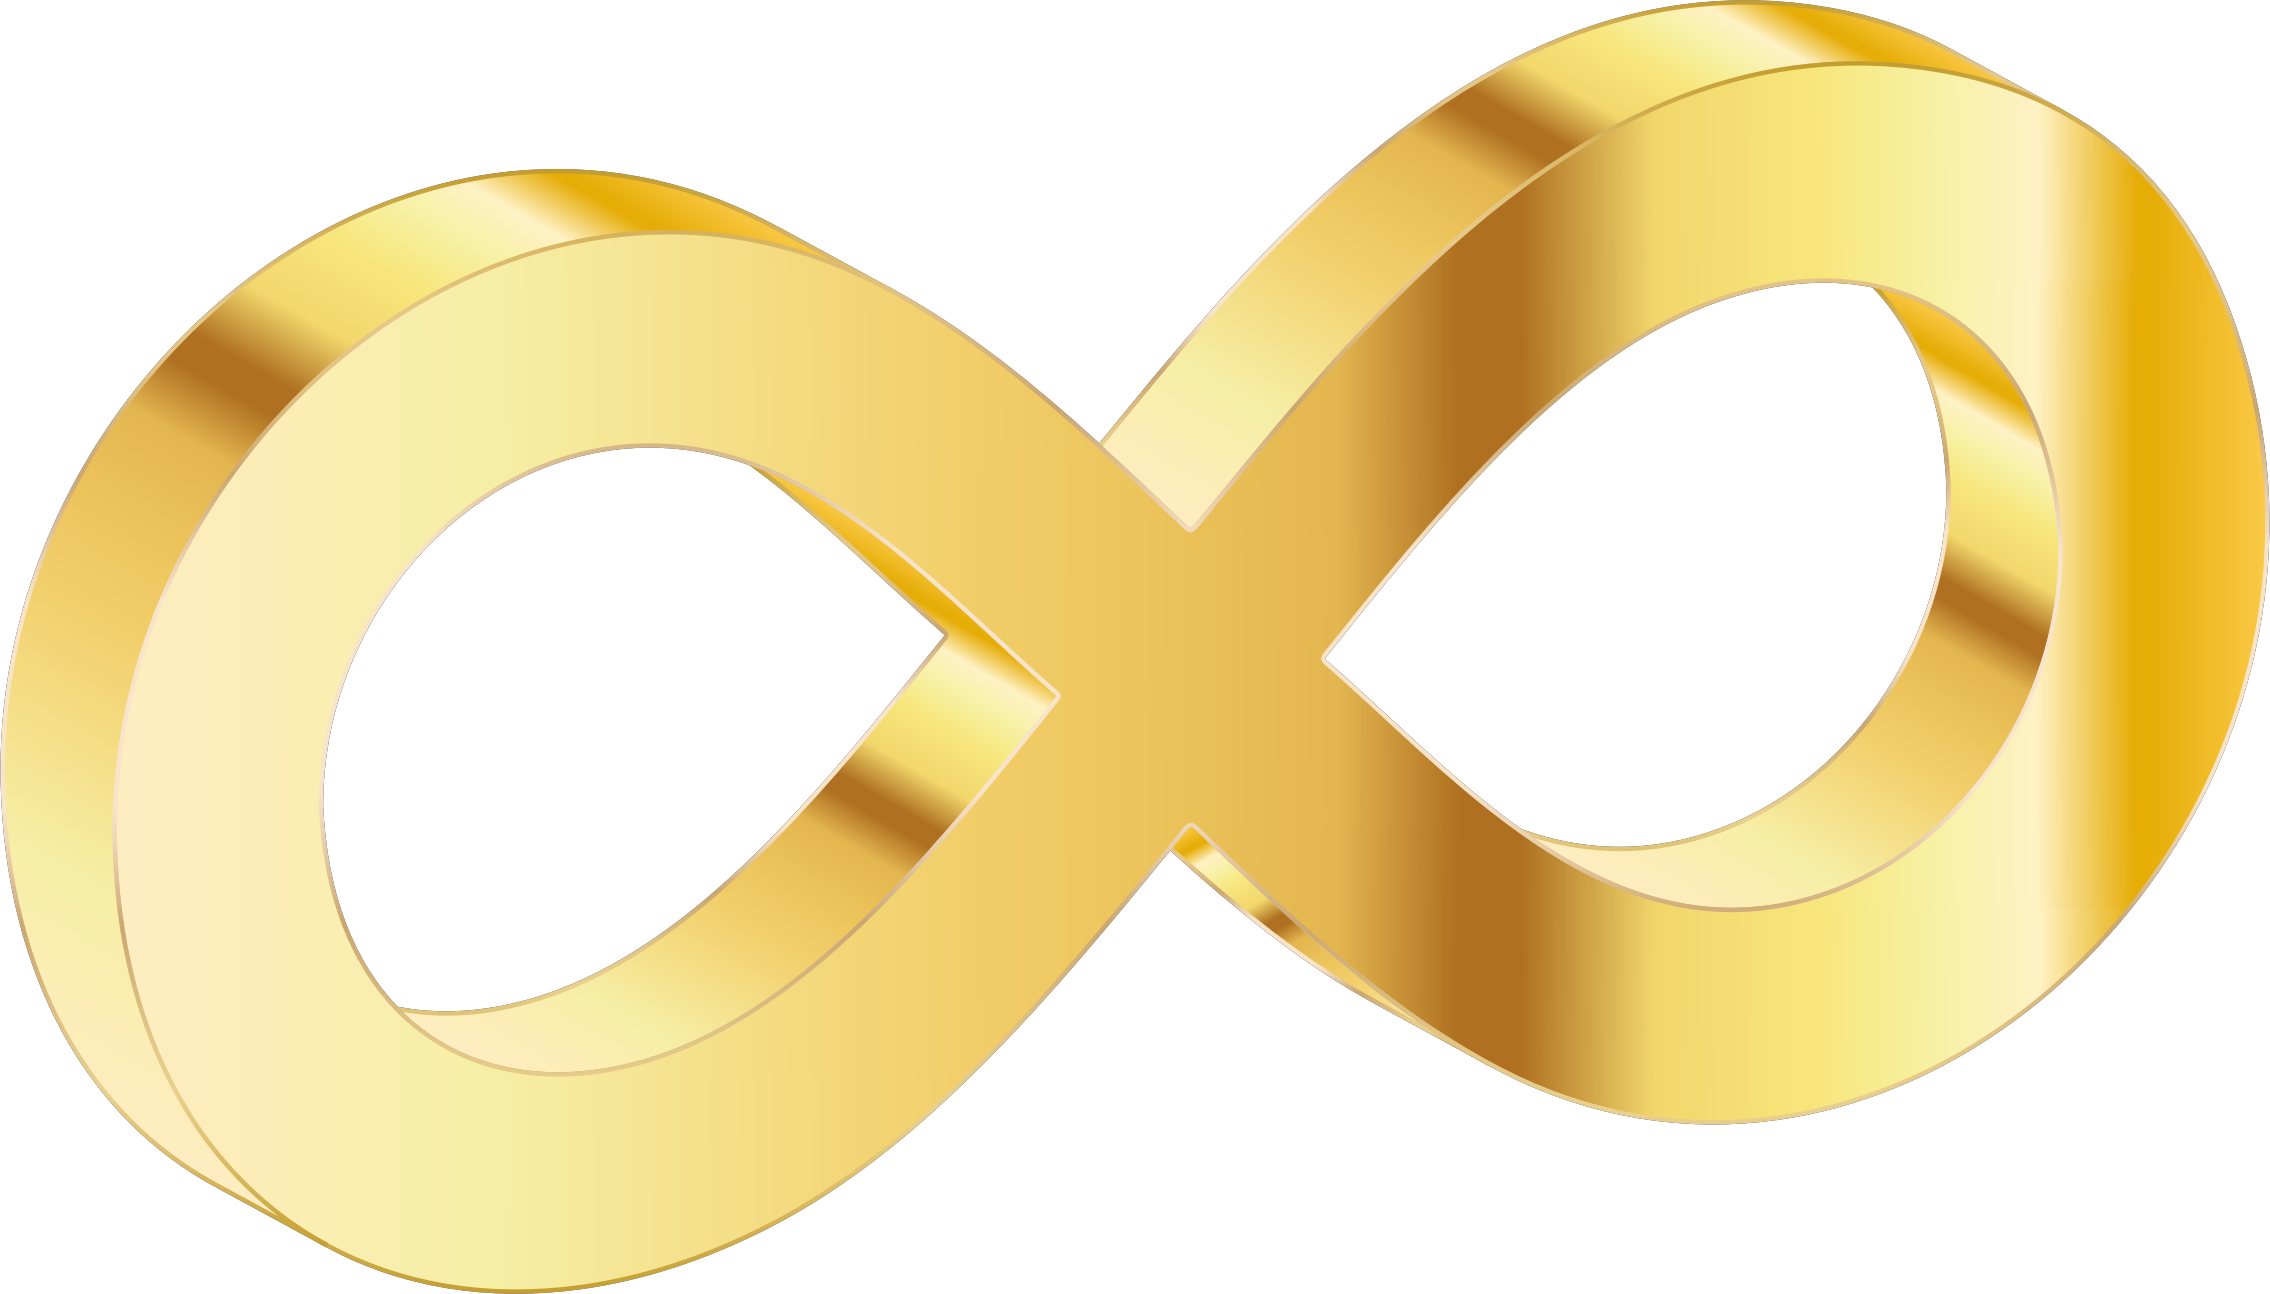 Infinity clipart infinity sign.  collection of png